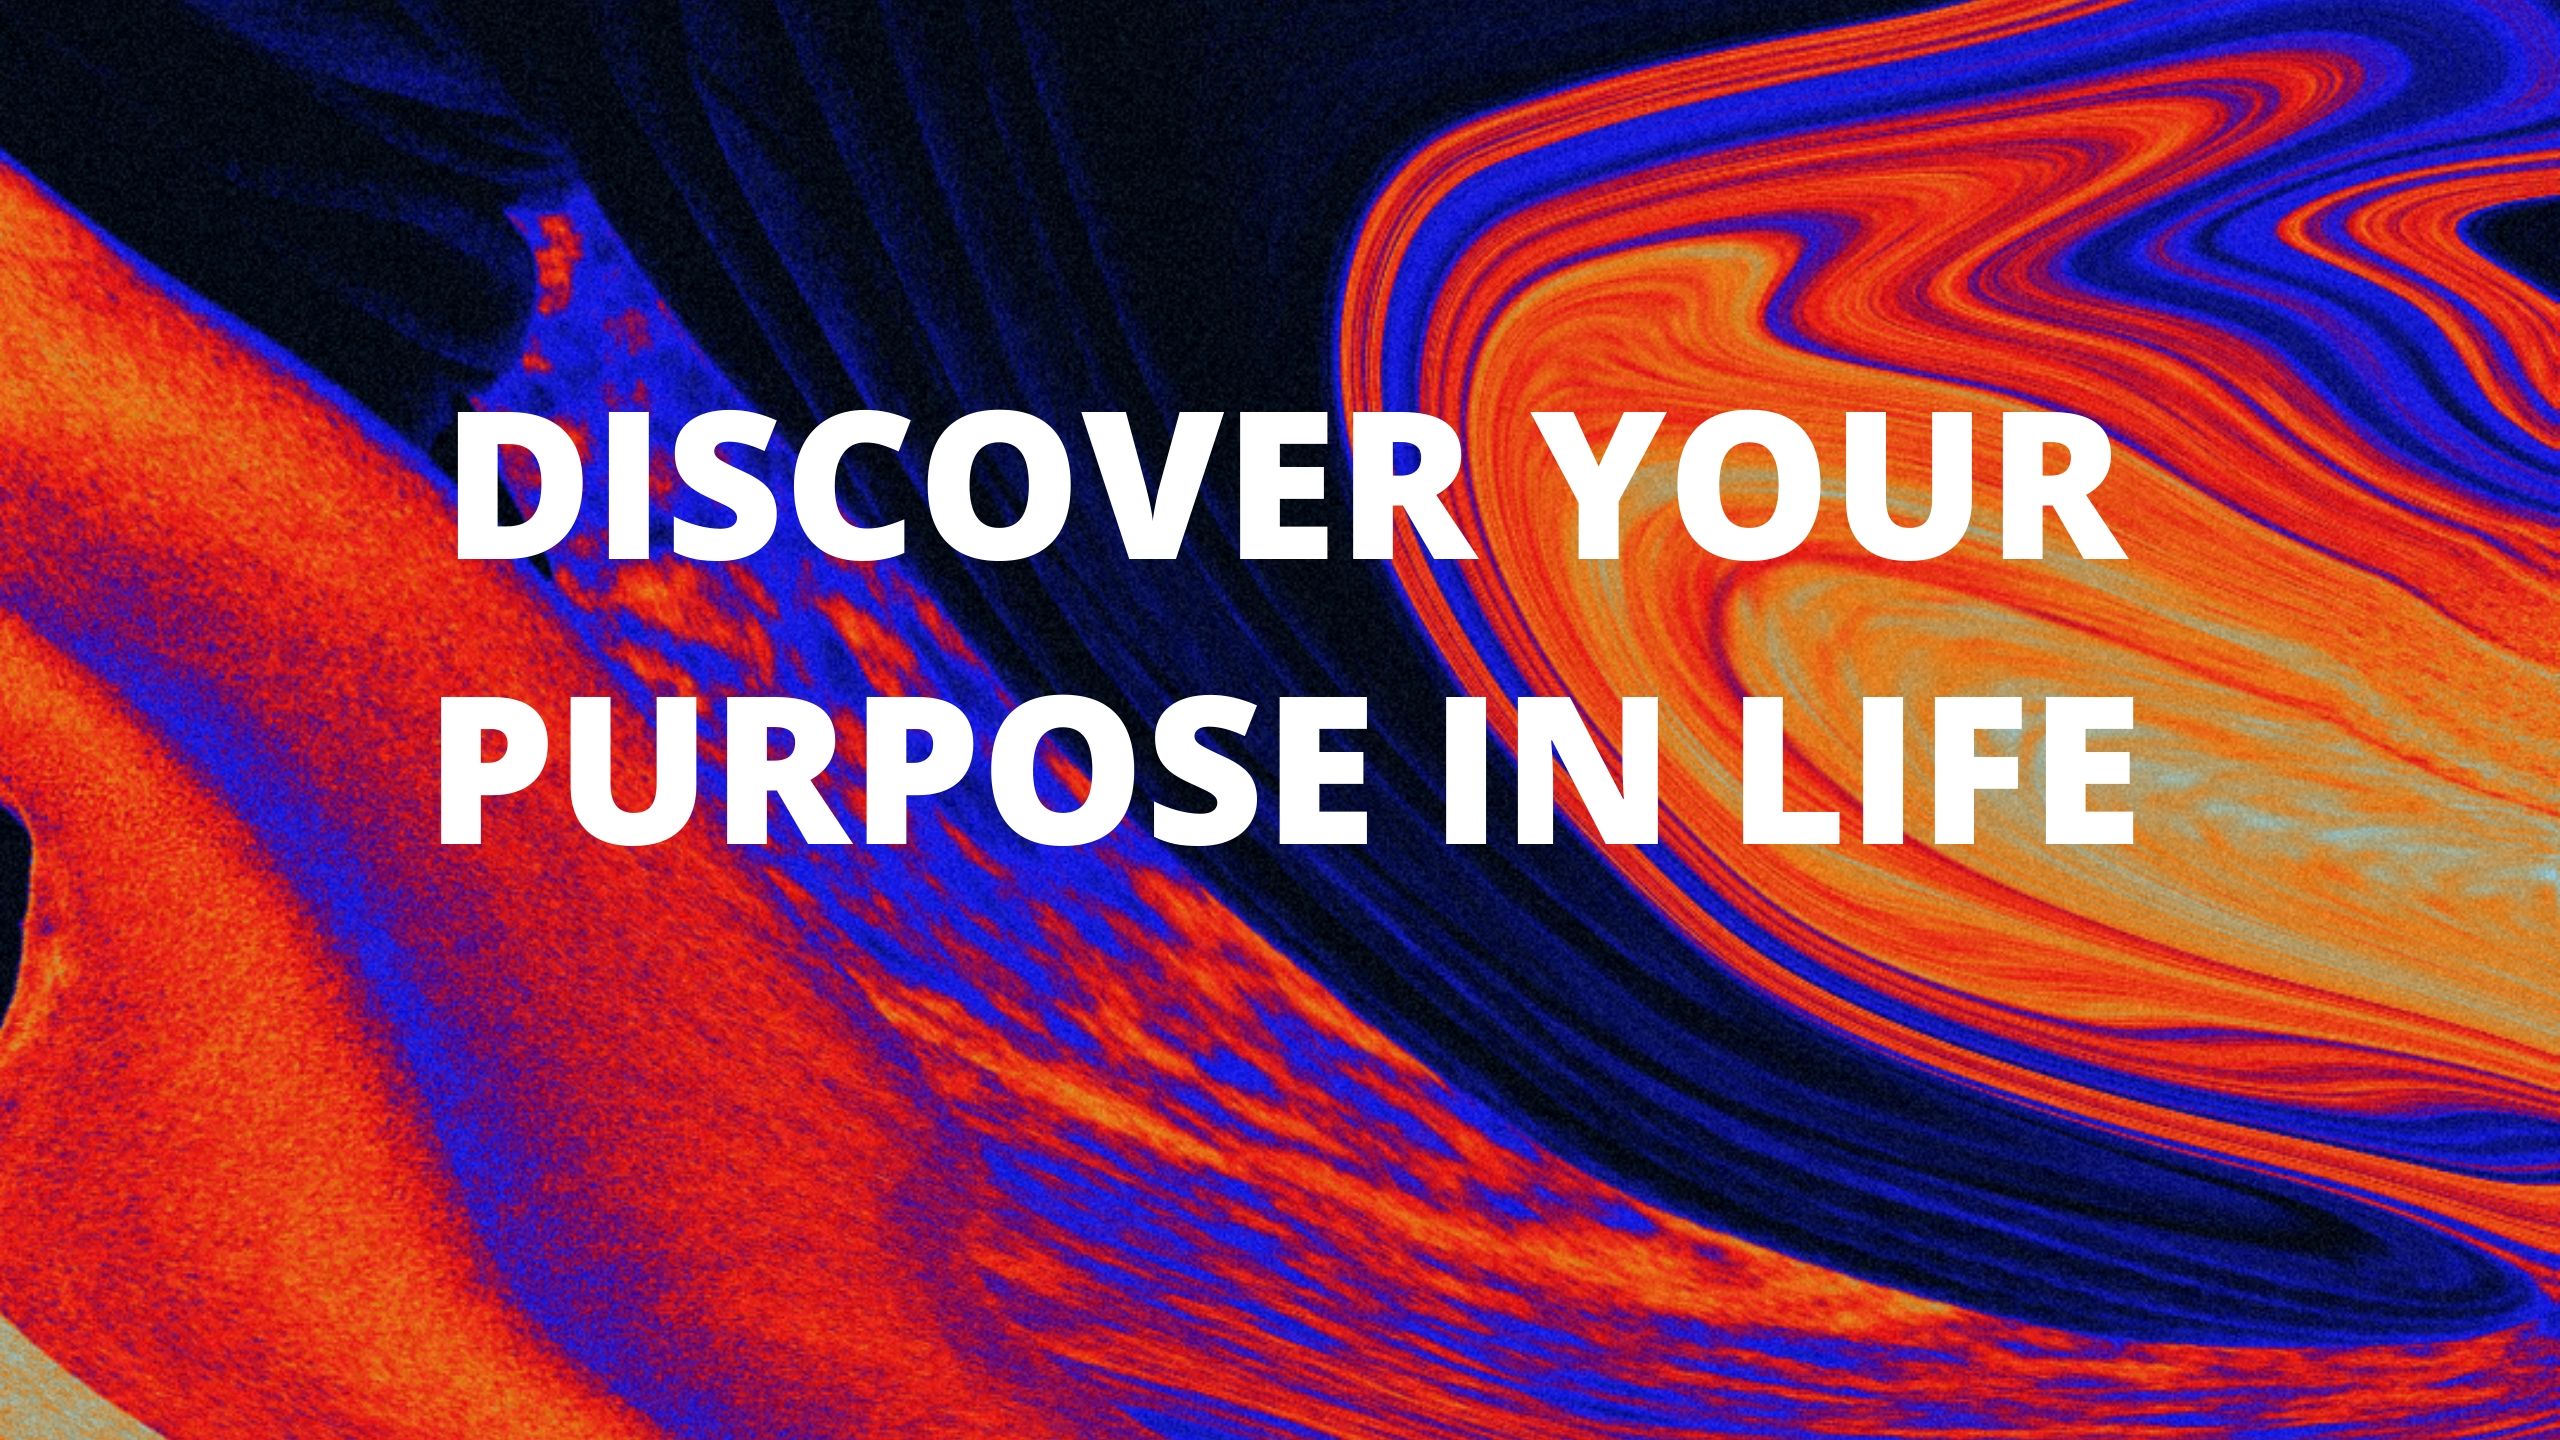 dISCOVER YOUR PURPOSE